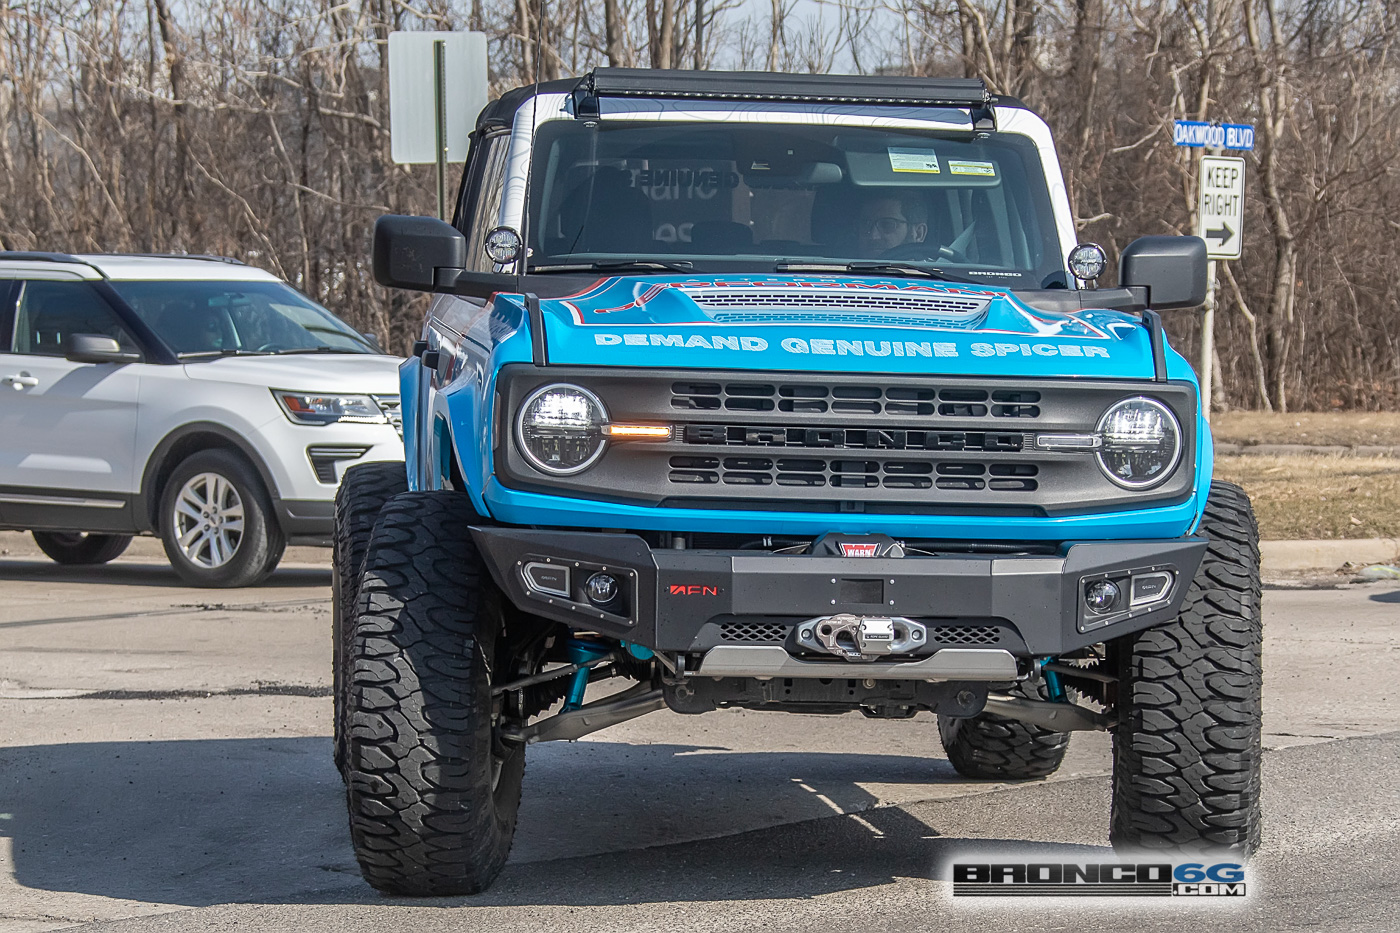 Ford Bronco The "Ultimate Ford Bronco Build" Caught Testing On The Streets Of Dearborn 20211111_105337